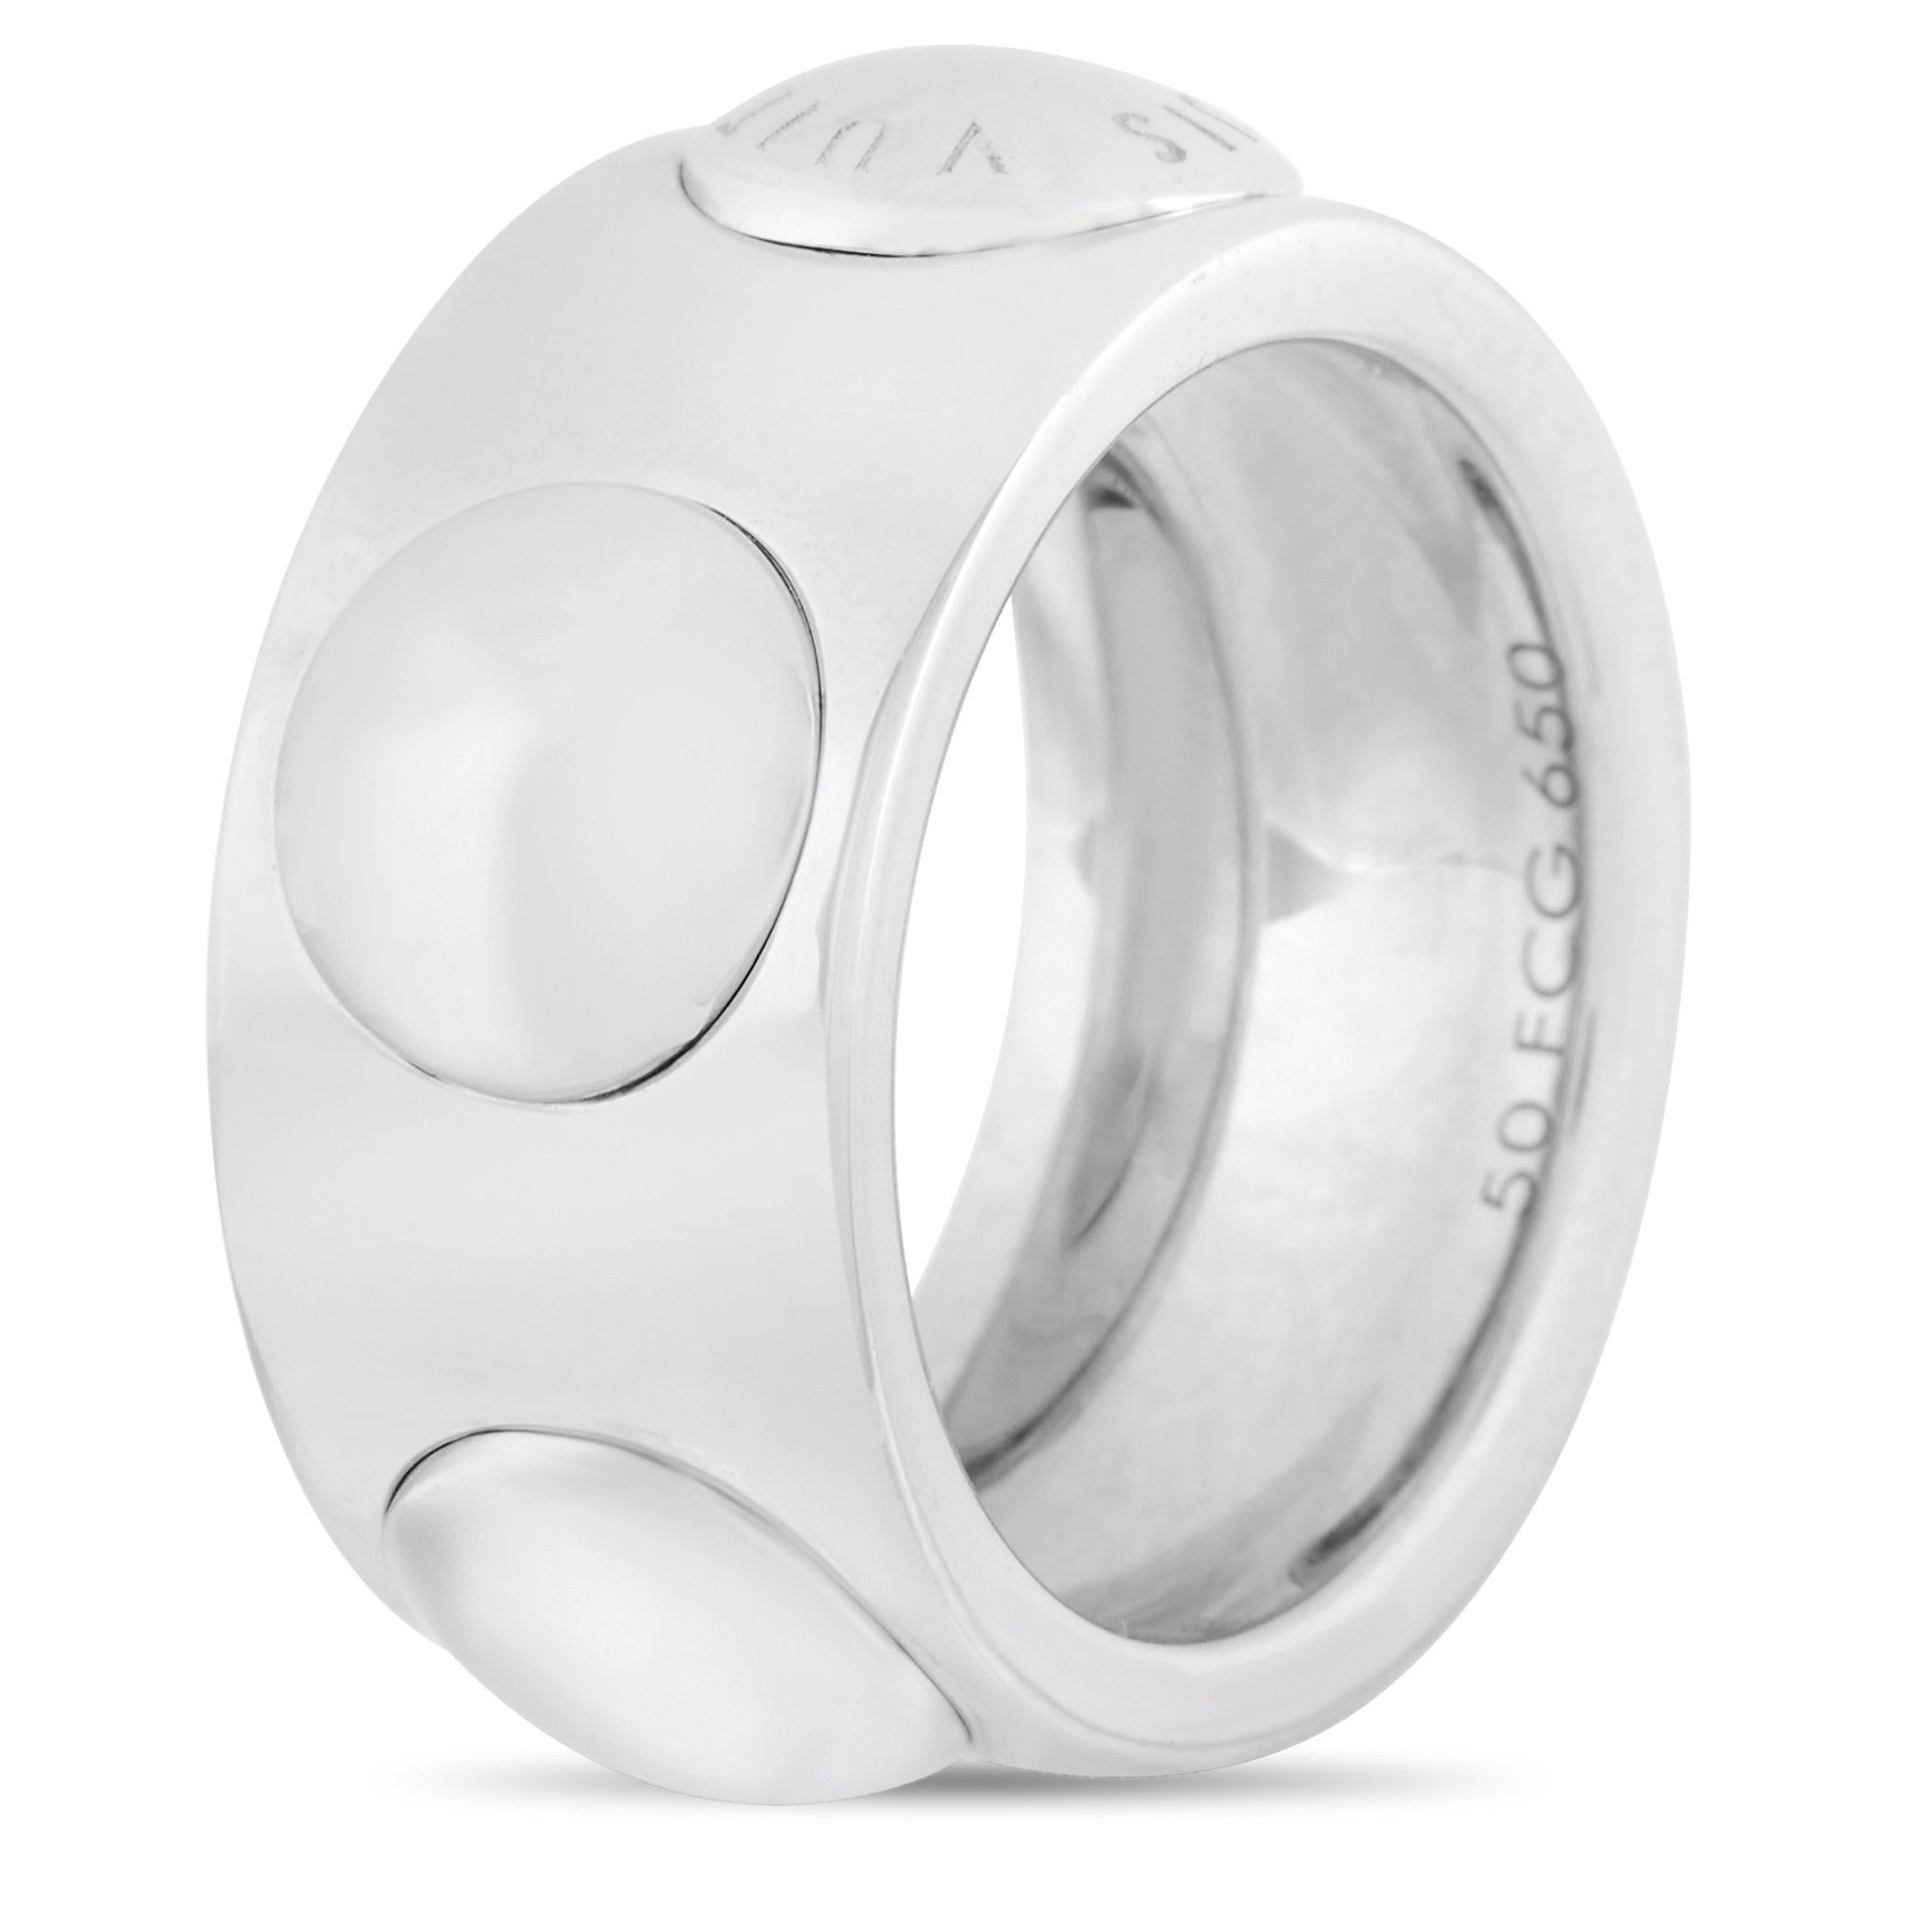 This Louis Vuitton 18K White Gold Band Ring is simple but unique. The ring is made with satin-finished 18K White Gold and features the Louis Vuitton Logo on polished white gold divets throughout the band. The ring has a band thickness of 9 mm with a